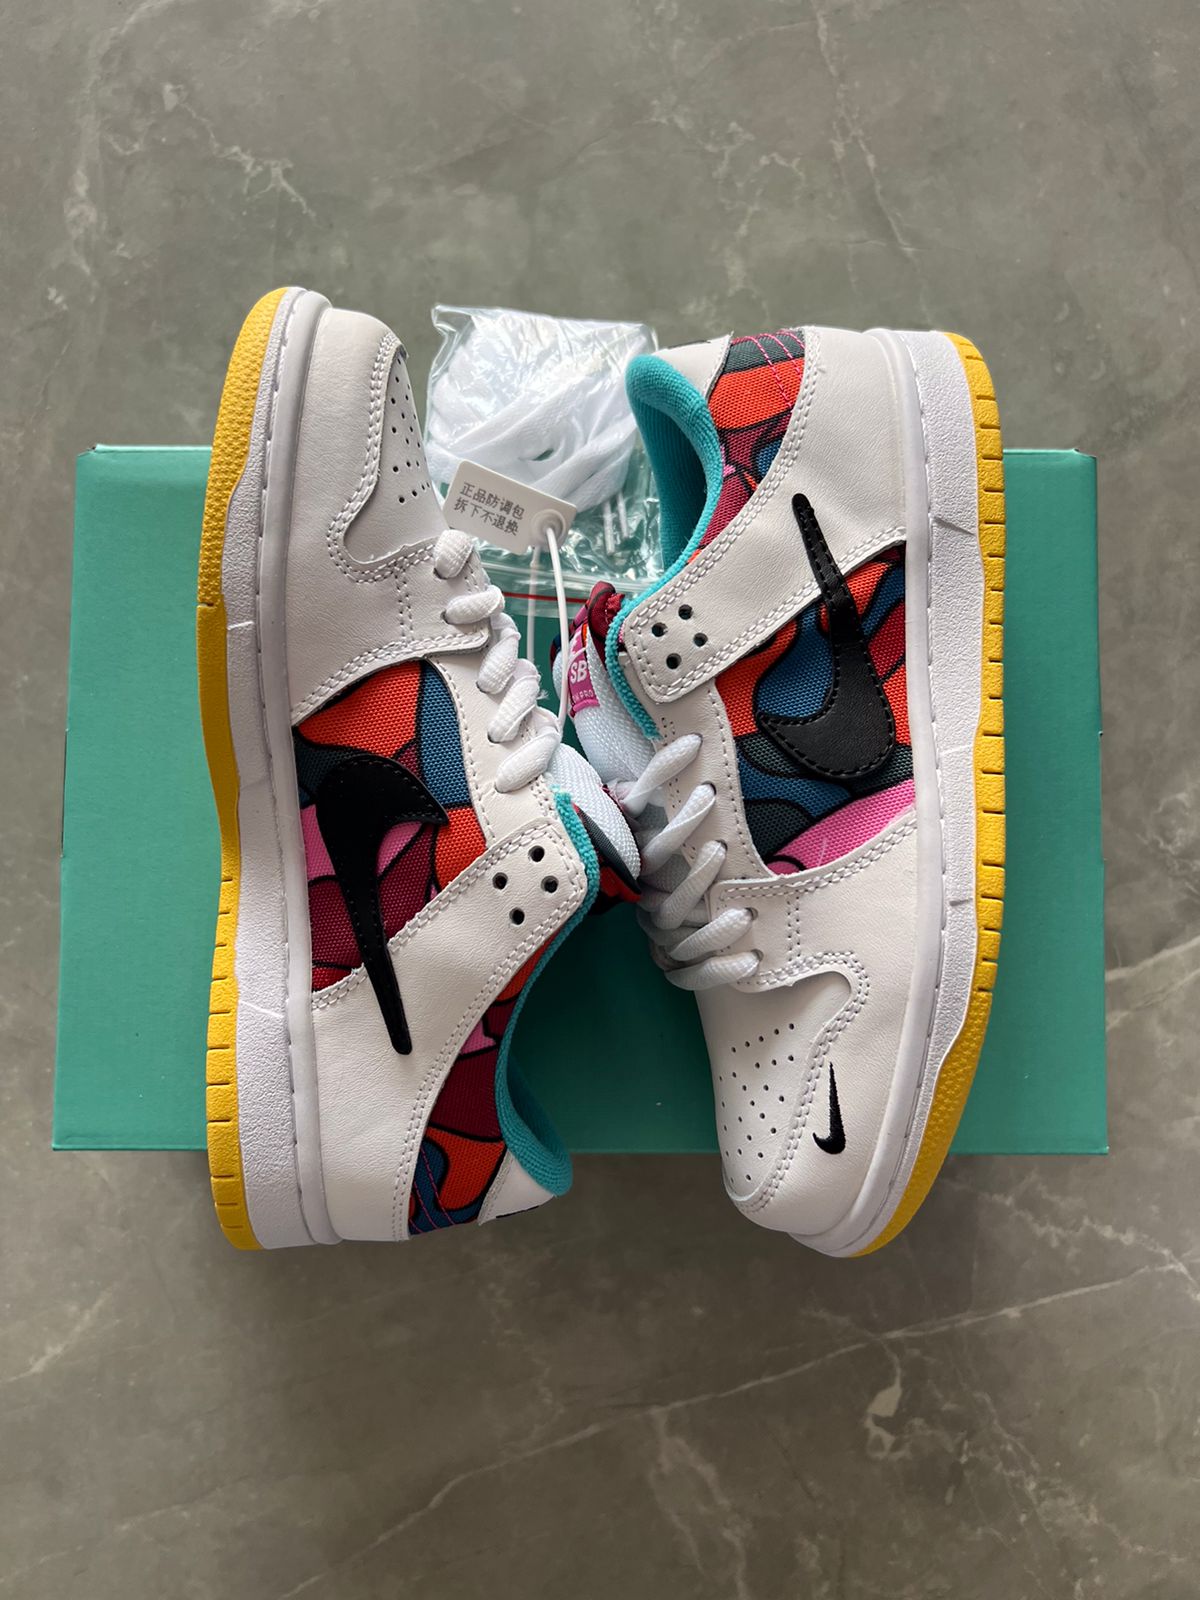 SB Dunk Parra 2 Sneakers For Girls